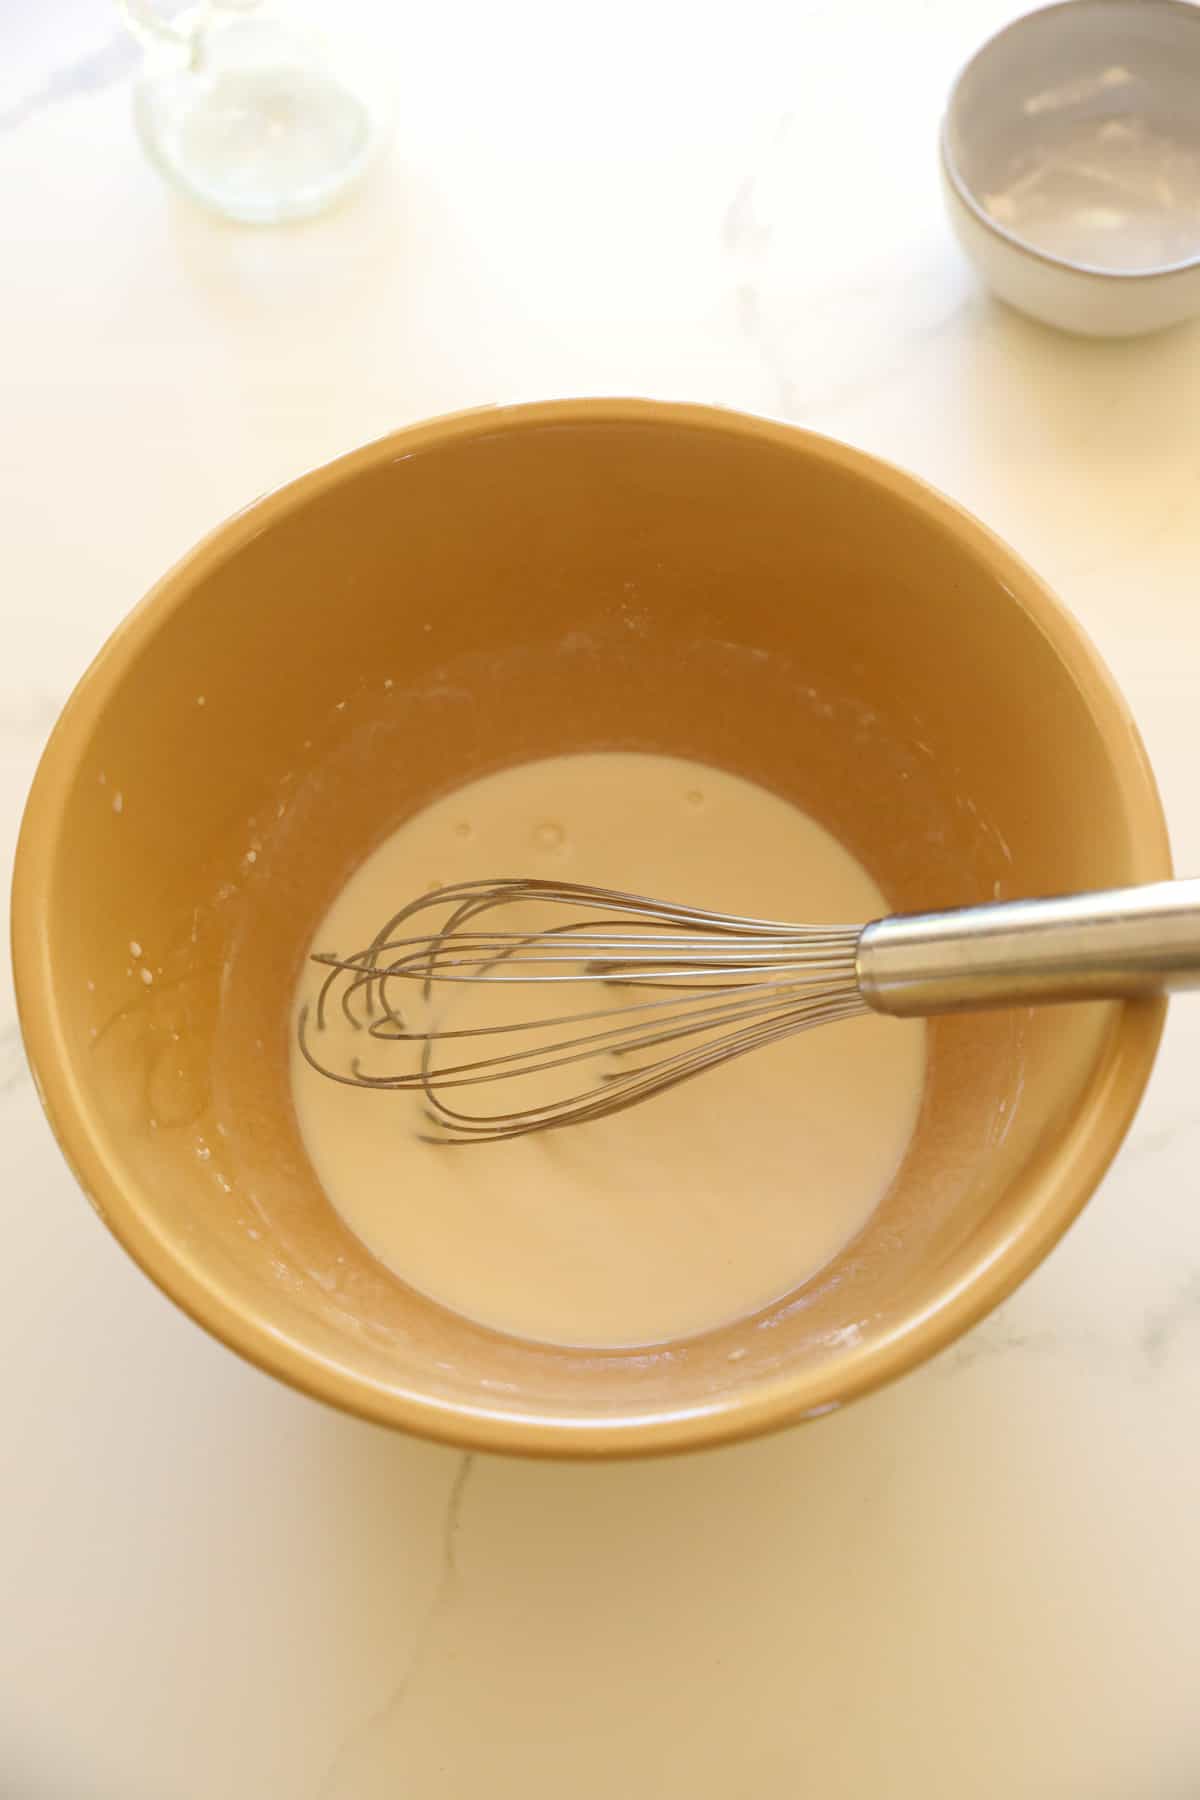 Batter in a bowl with a whisk